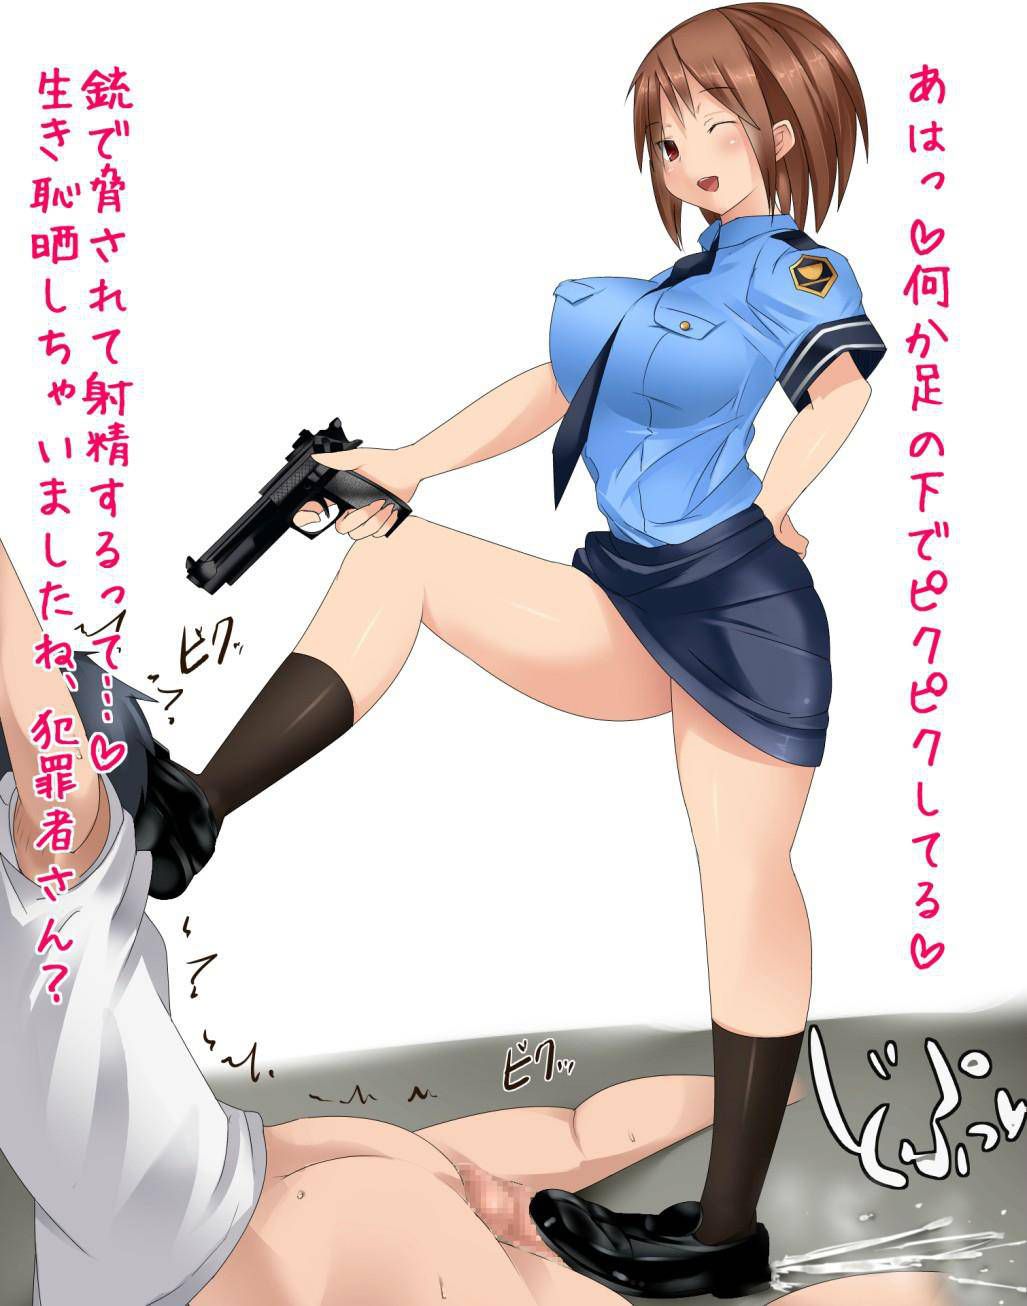 [Secondary] erotic image summary of the beautiful woman police who want to ask you to take a shot by all means while being arrested 23